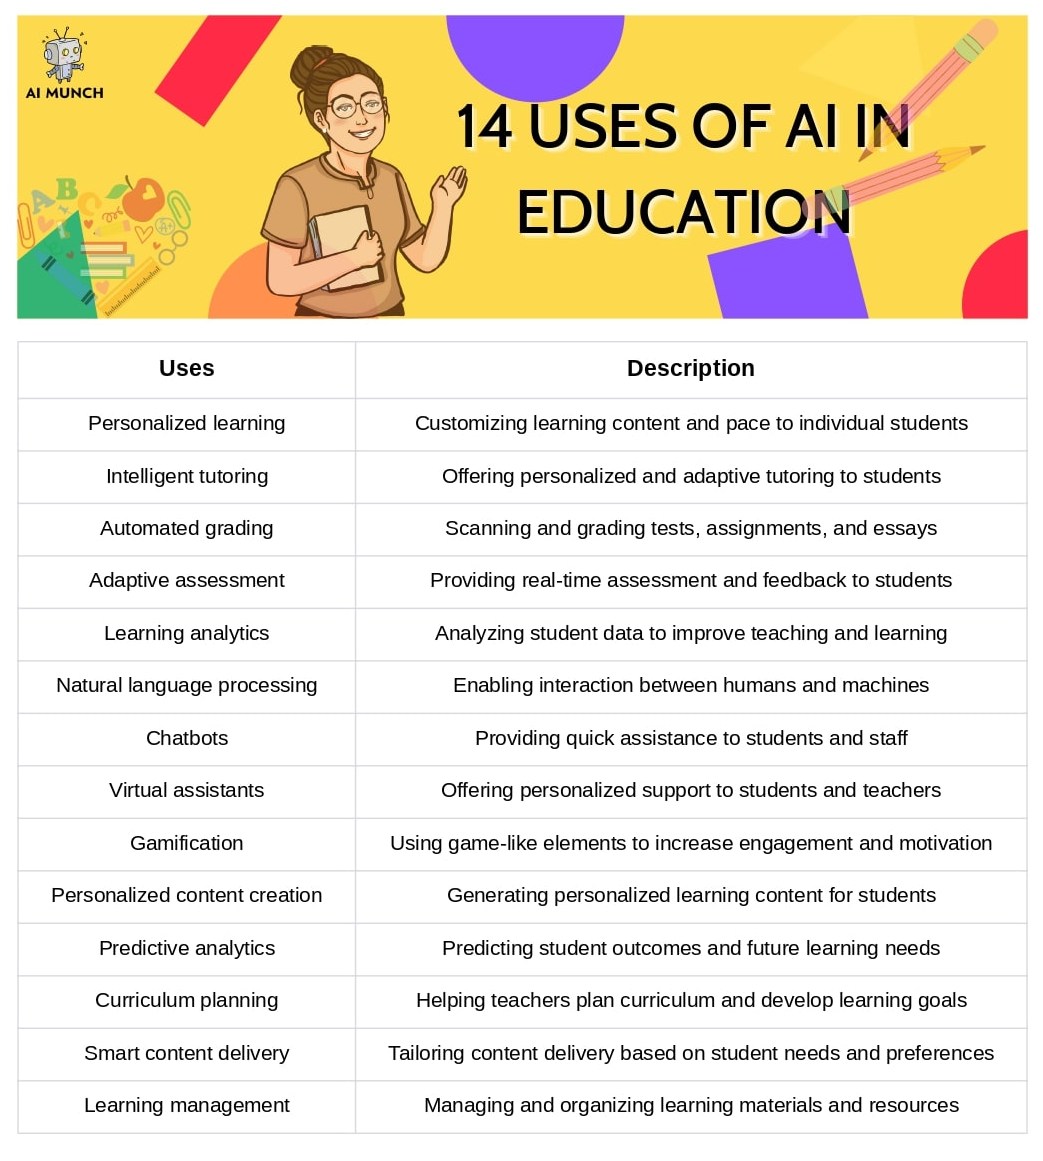 ai in learning and education: 14 uses of AI in education and advantages of using artificial intelligence for education